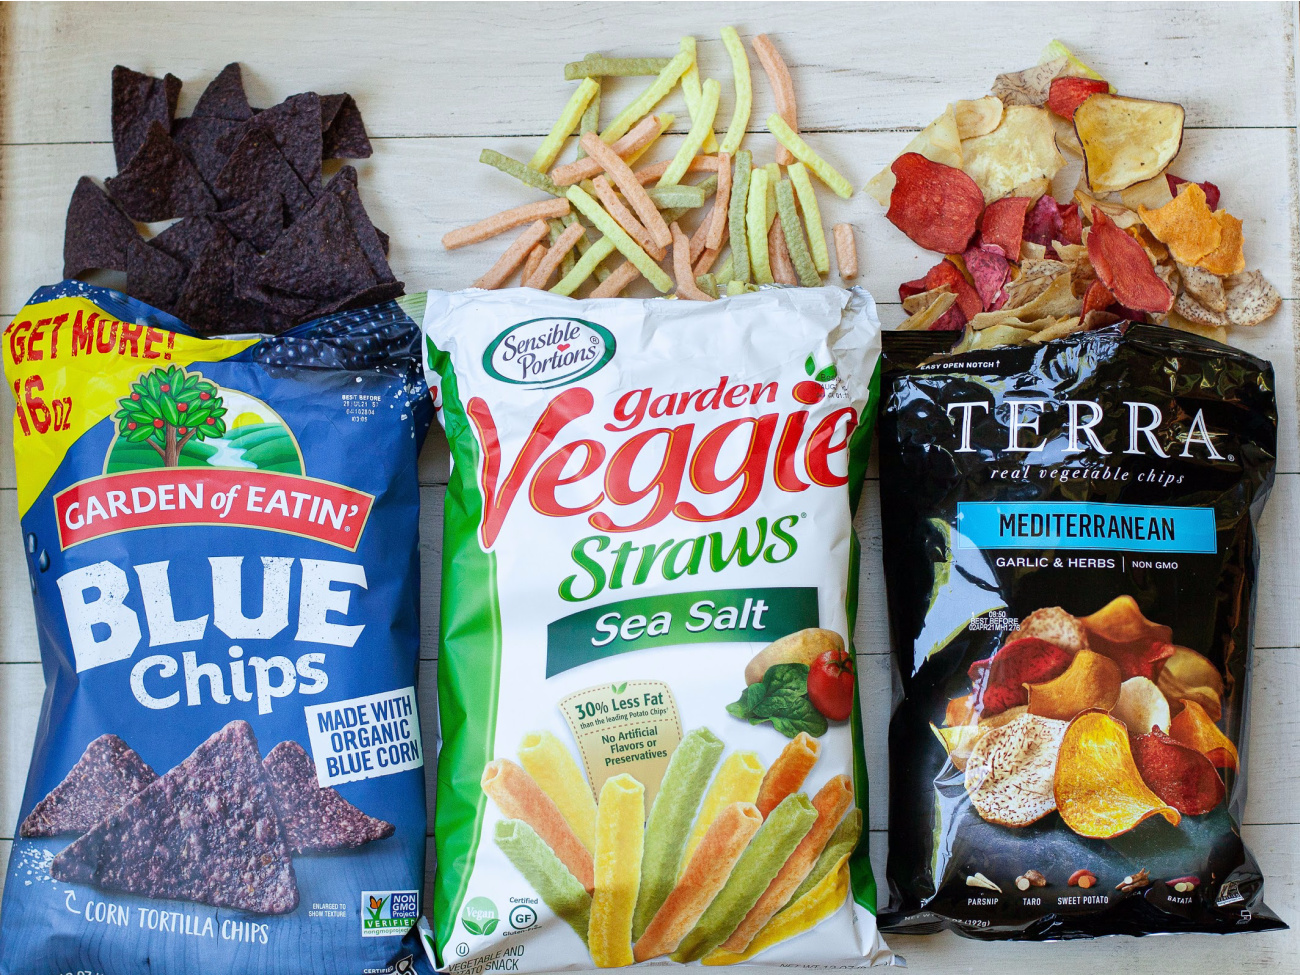 Upgrade Your Snacks – Look For Terra Chips, Garden of Eatin’ Tortilla Chips and Sensible Portions Products On Sale At Publix